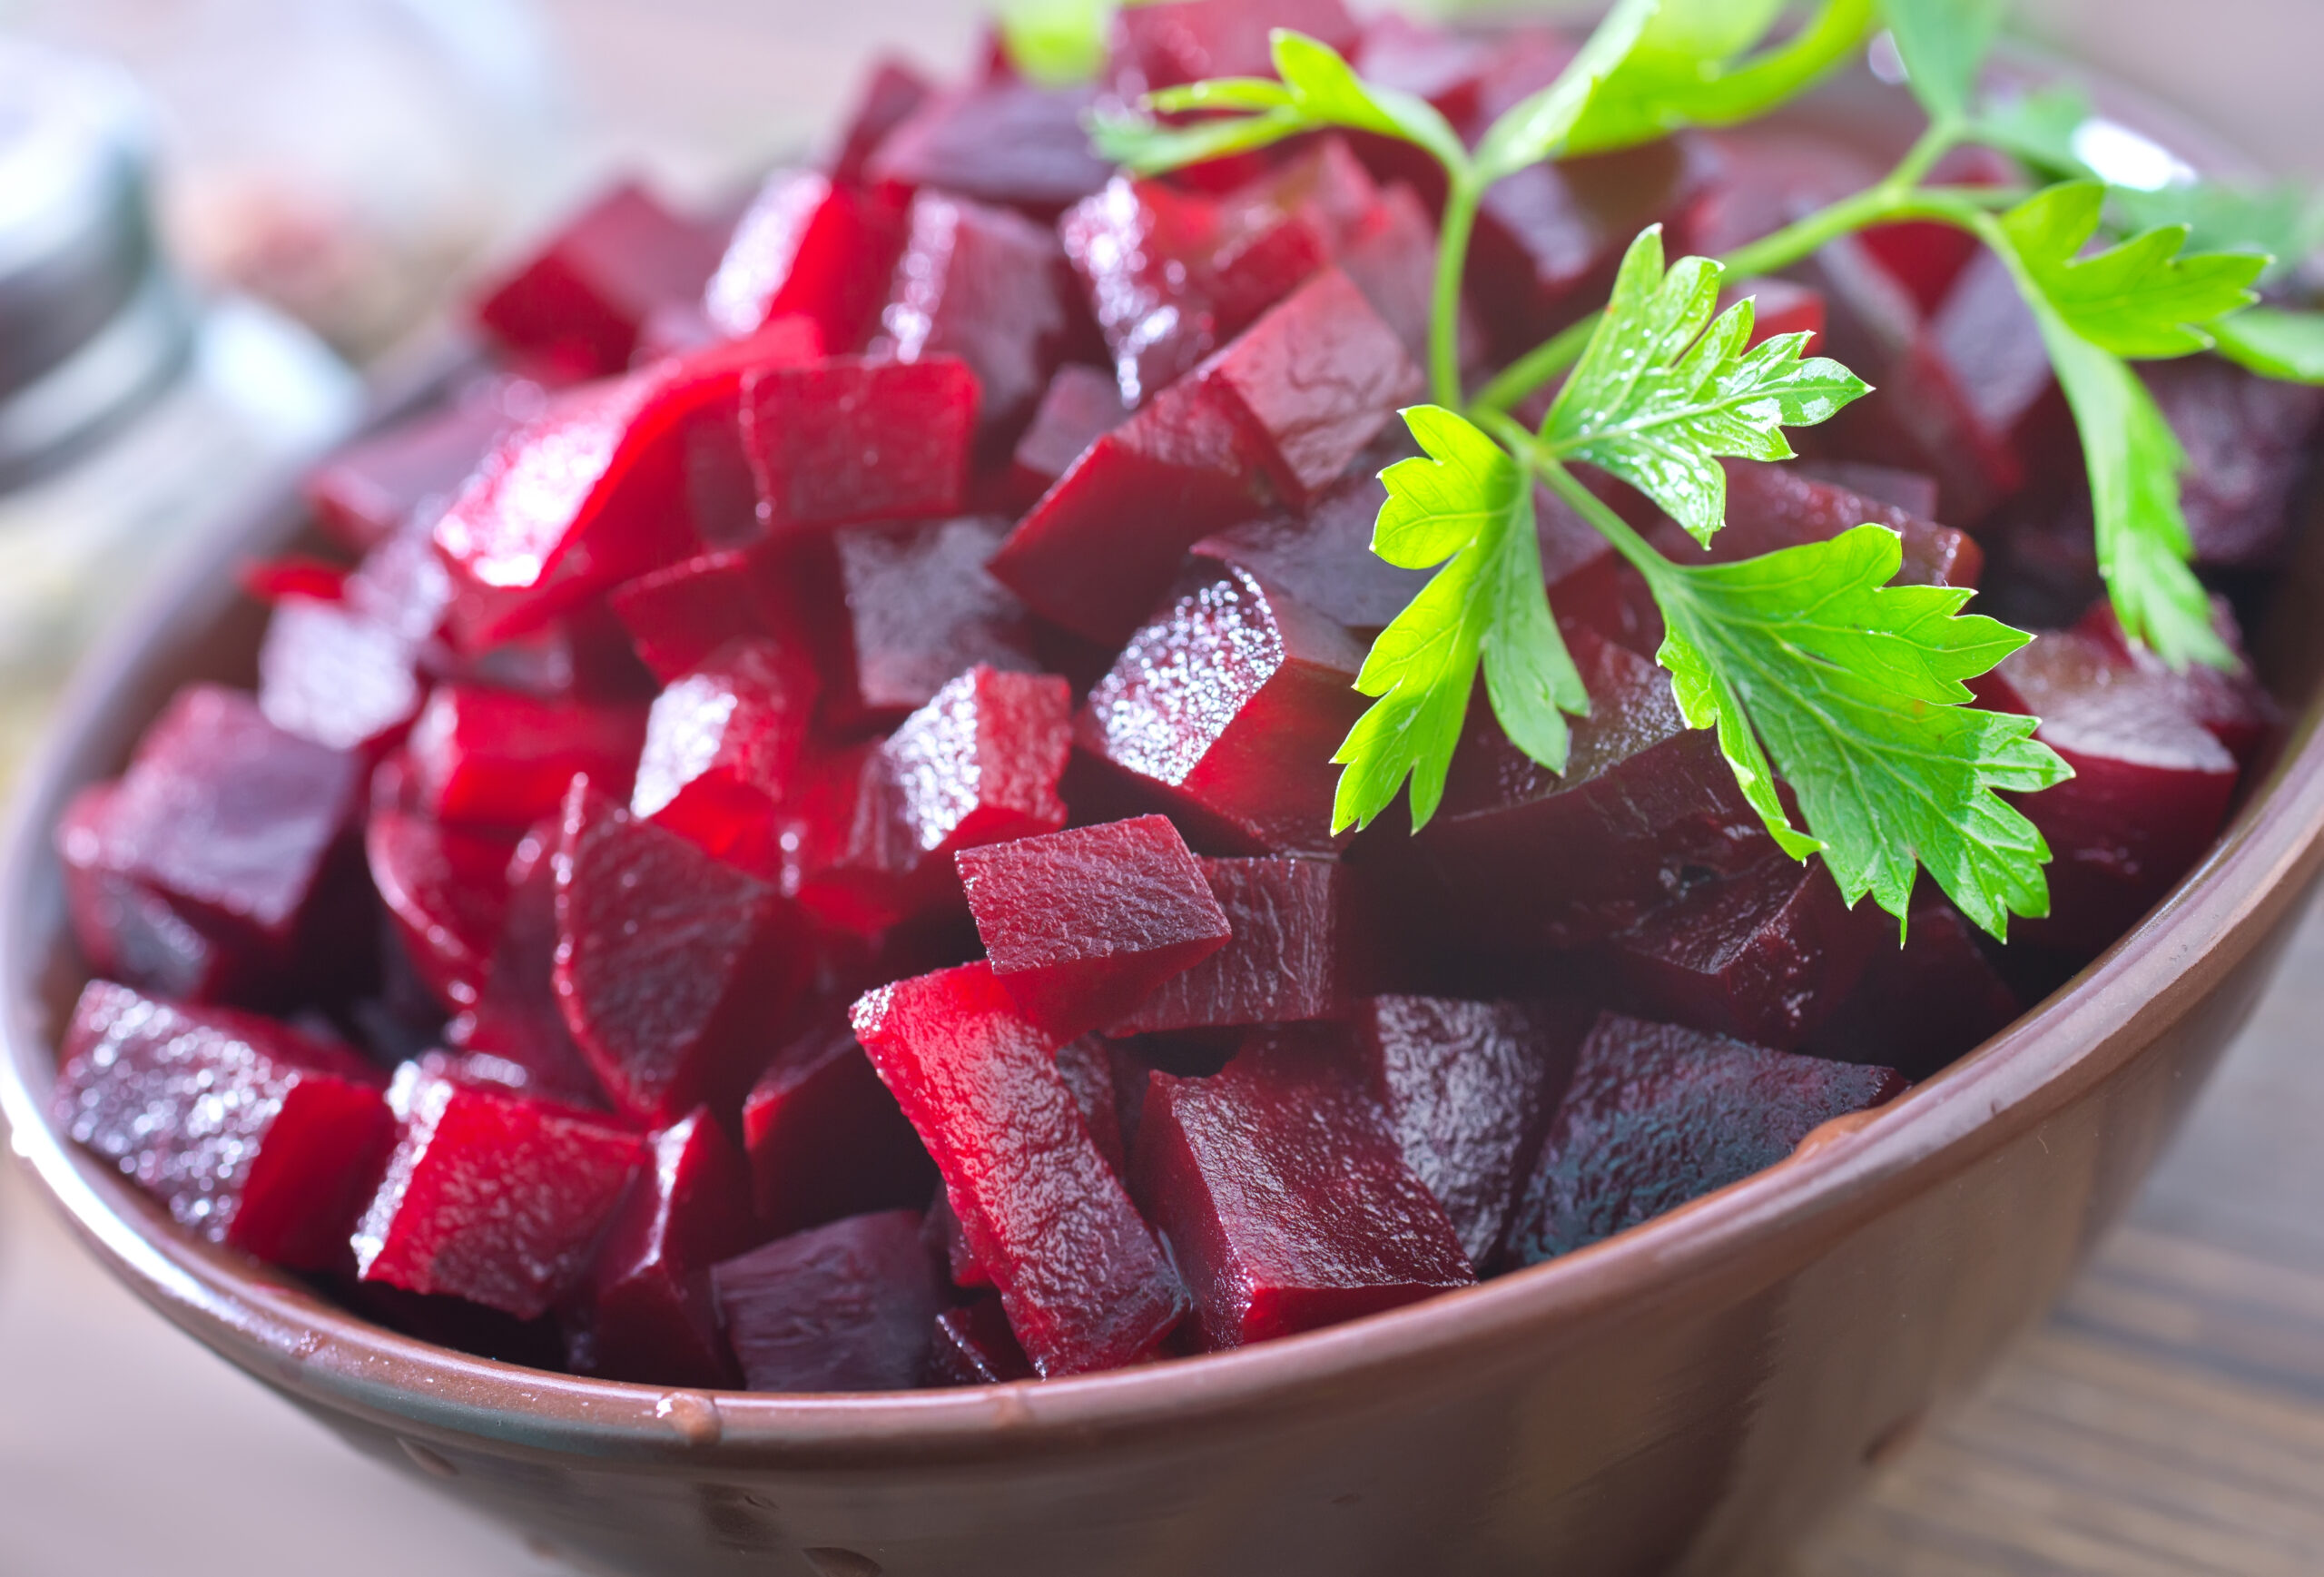 Are Pickled Beets Good for You?